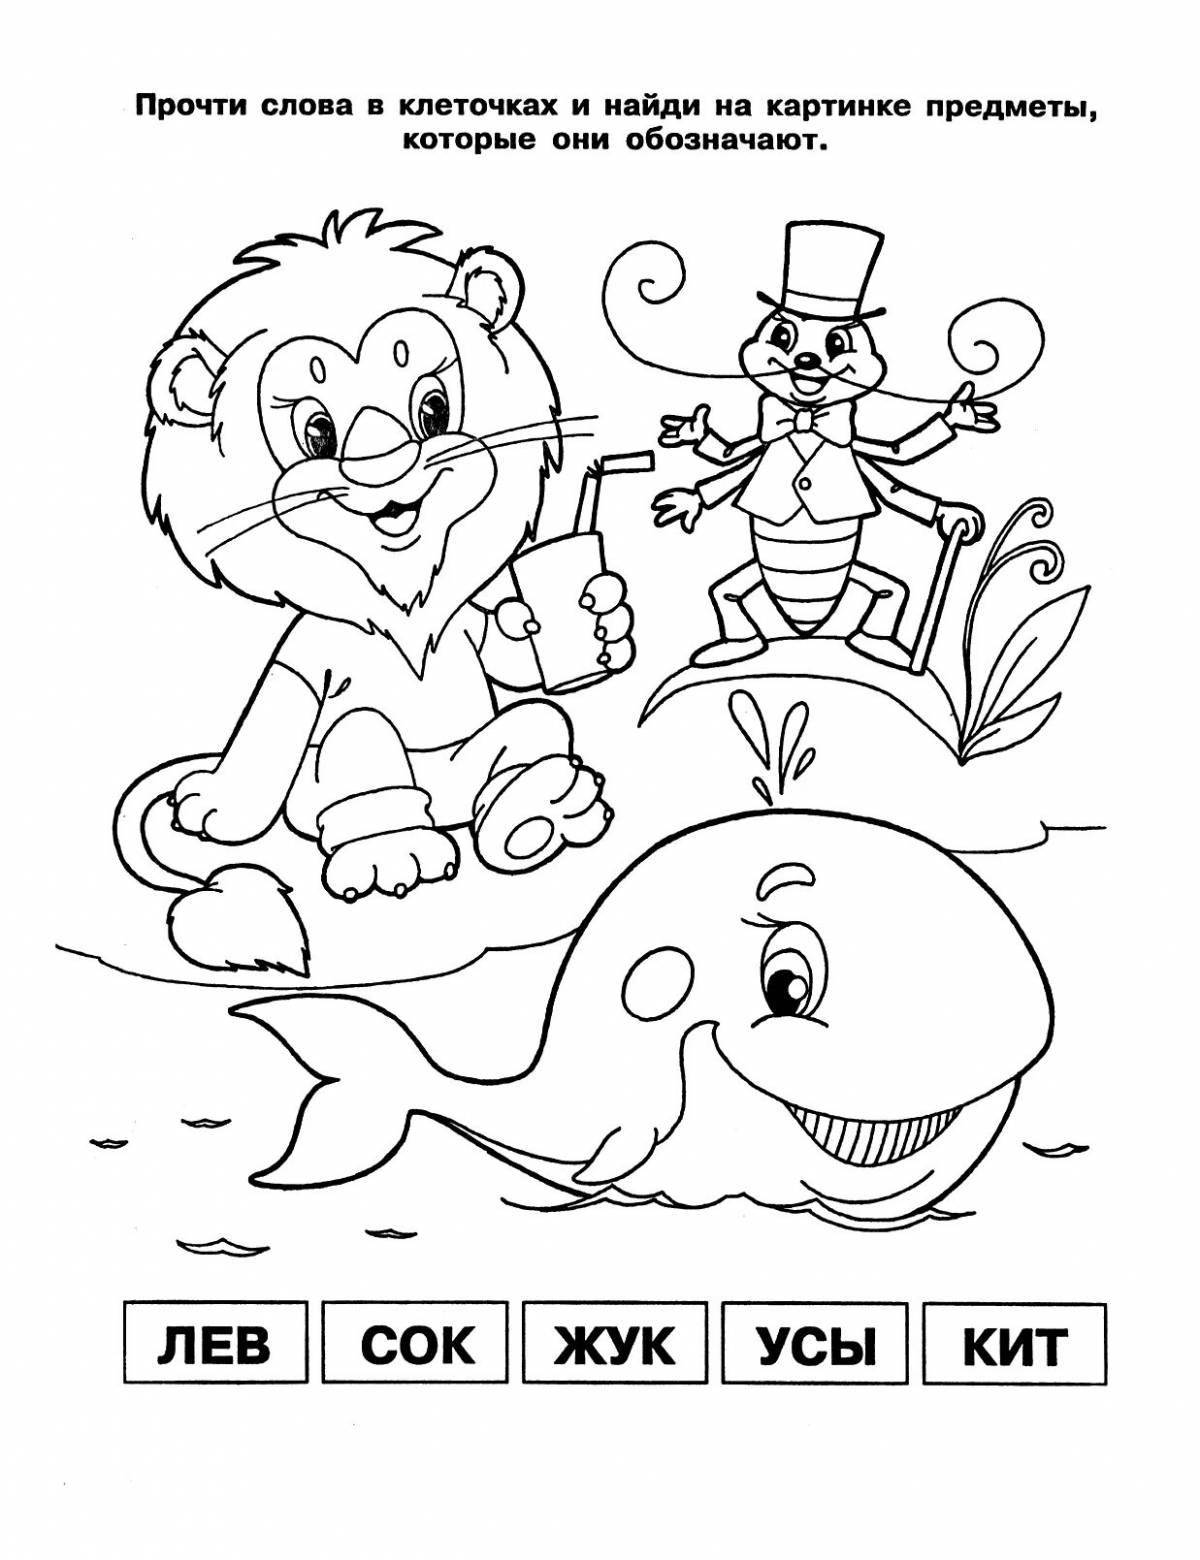 Fun syllable coloring pages for preschoolers